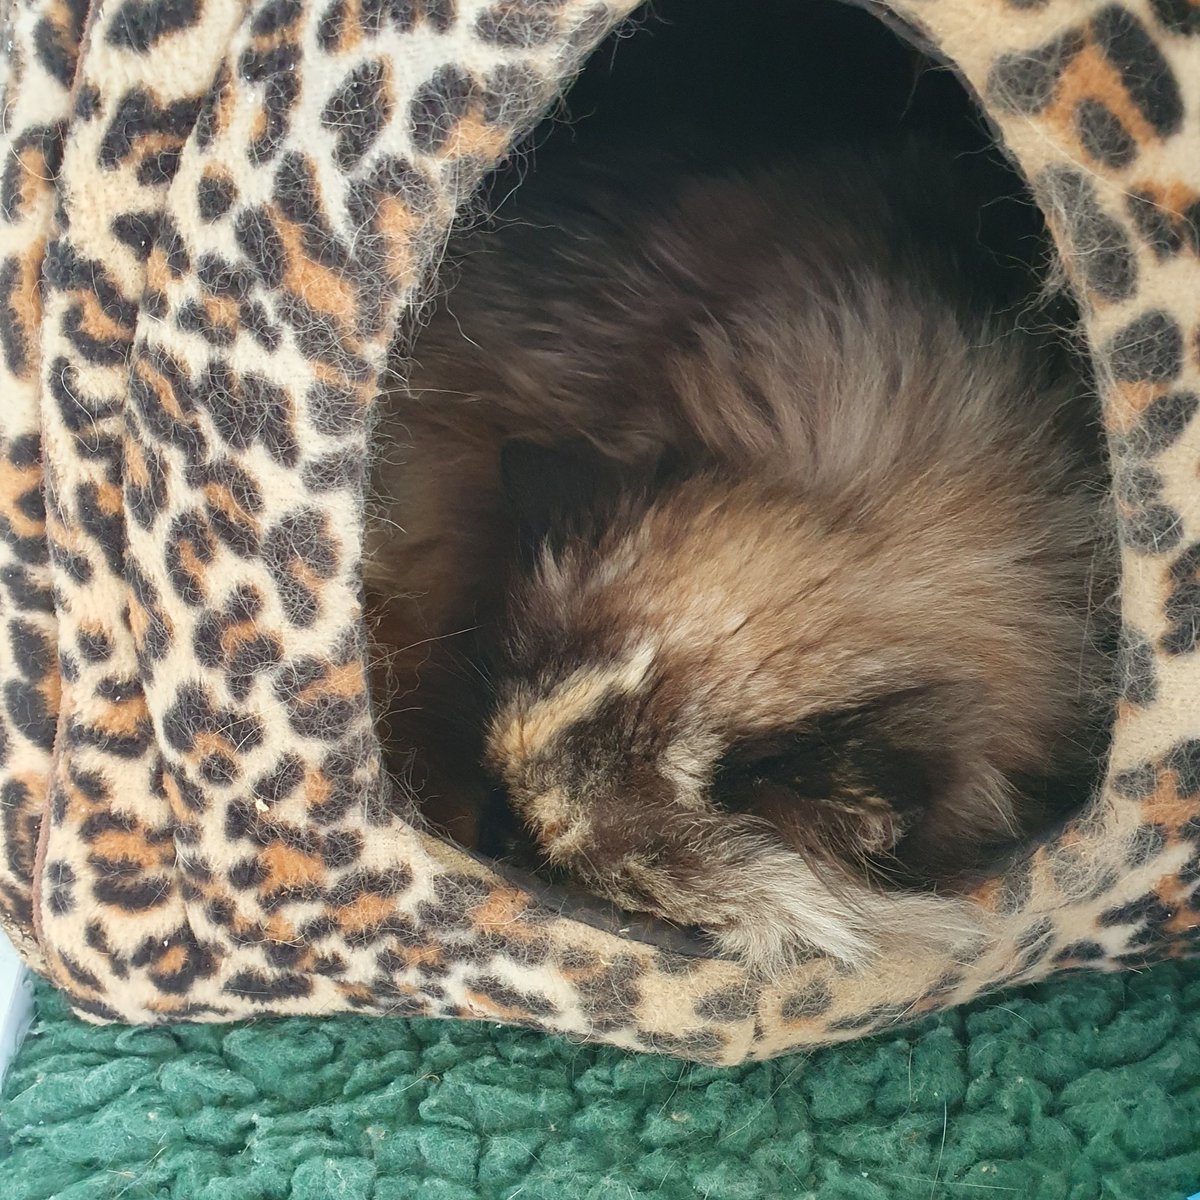 #GivingTuesday ~ Tula has decided the best place to be is in her favourite igloo on this wet morning. She is one of the Freerangers & they can be sponsored for £20 pa. Contact Sam sponsorship@shropshirecatrescue.org.uk or go to shropshirecatrescue.org.uk/sponsor-a-cat #inthecompanyofcats #sleepy